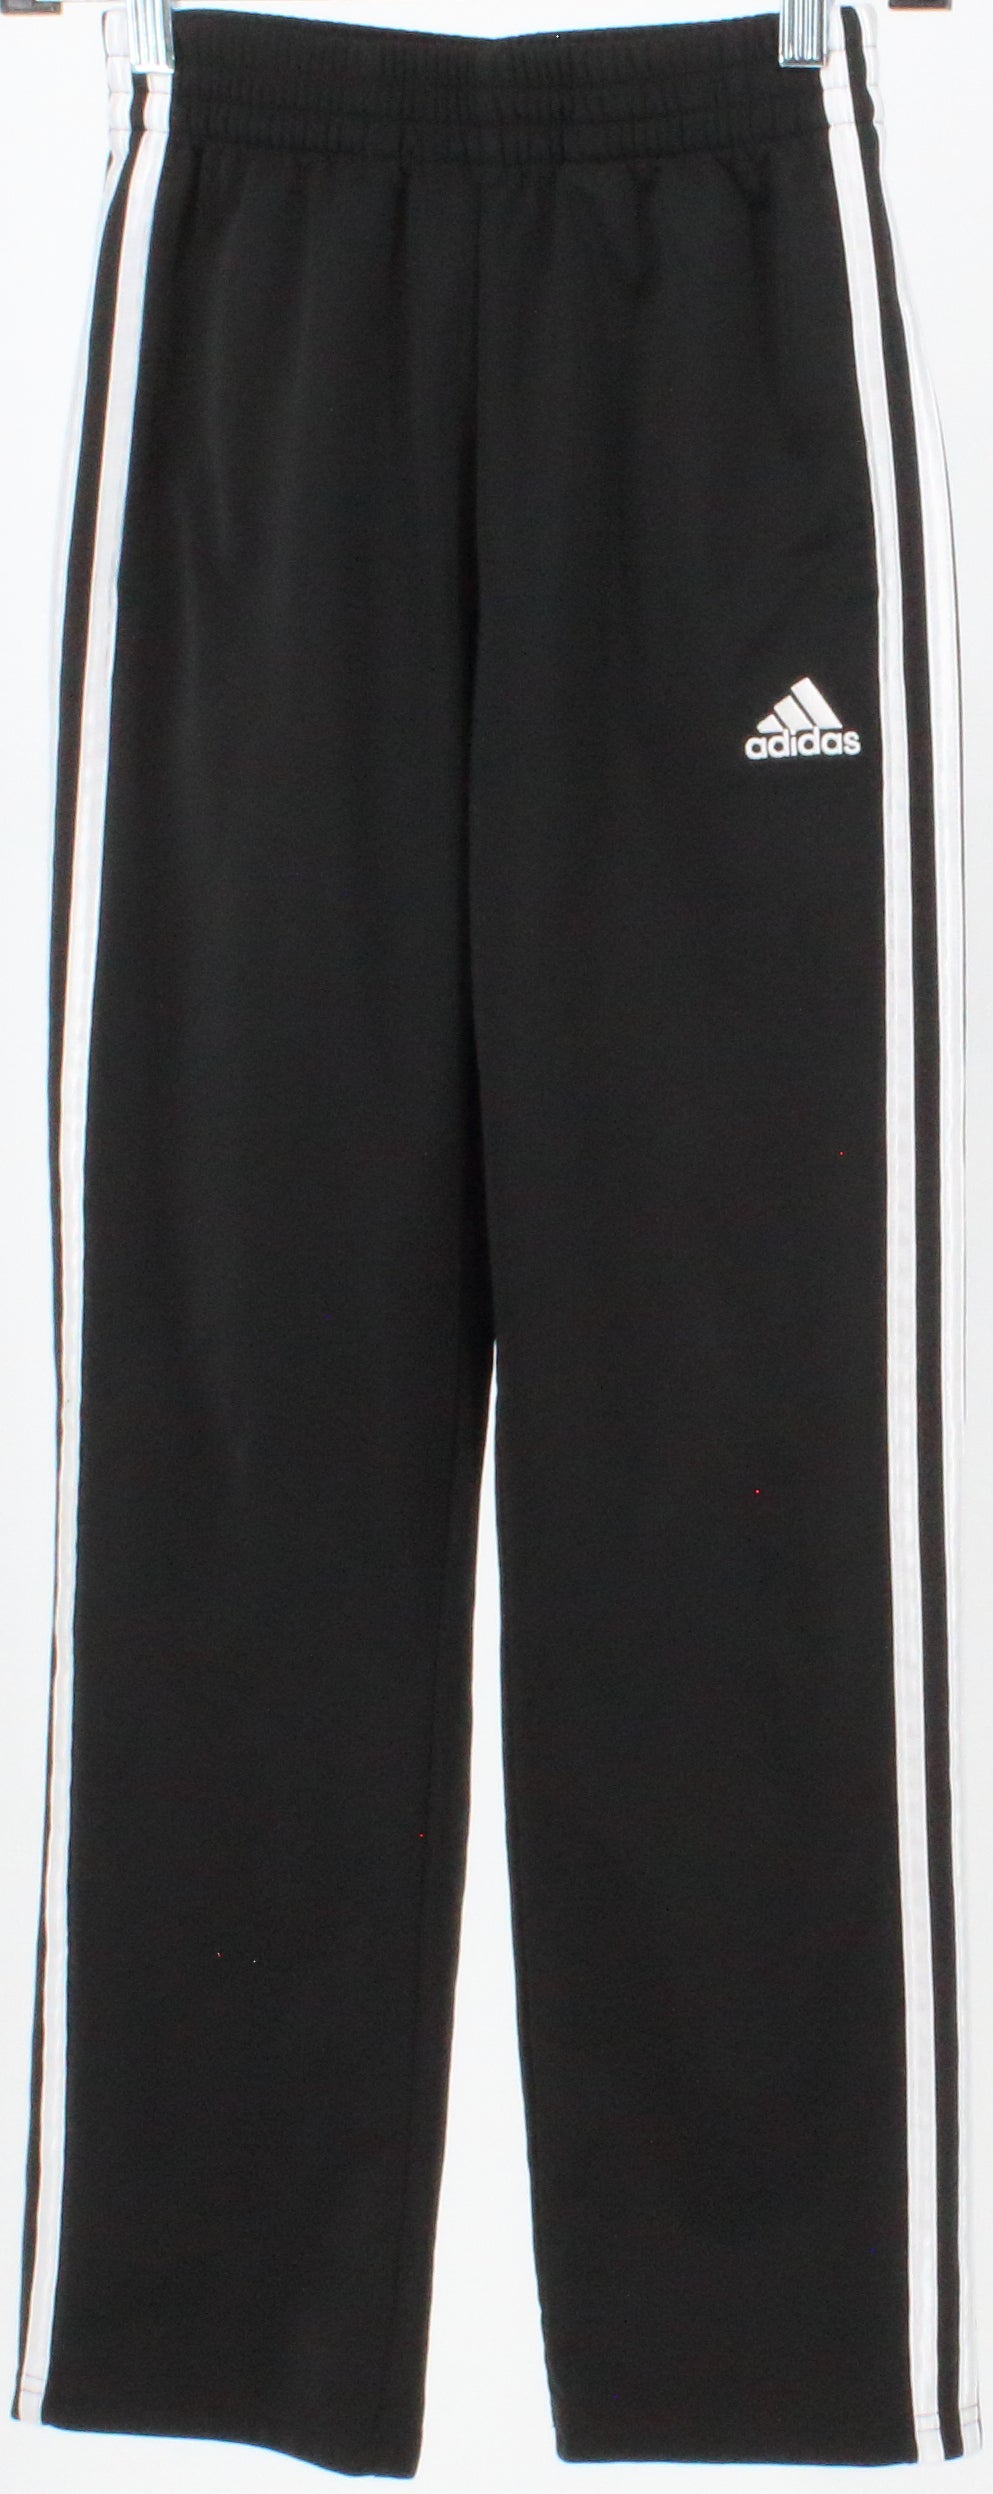 Adidas Youth Black and White Active Pants